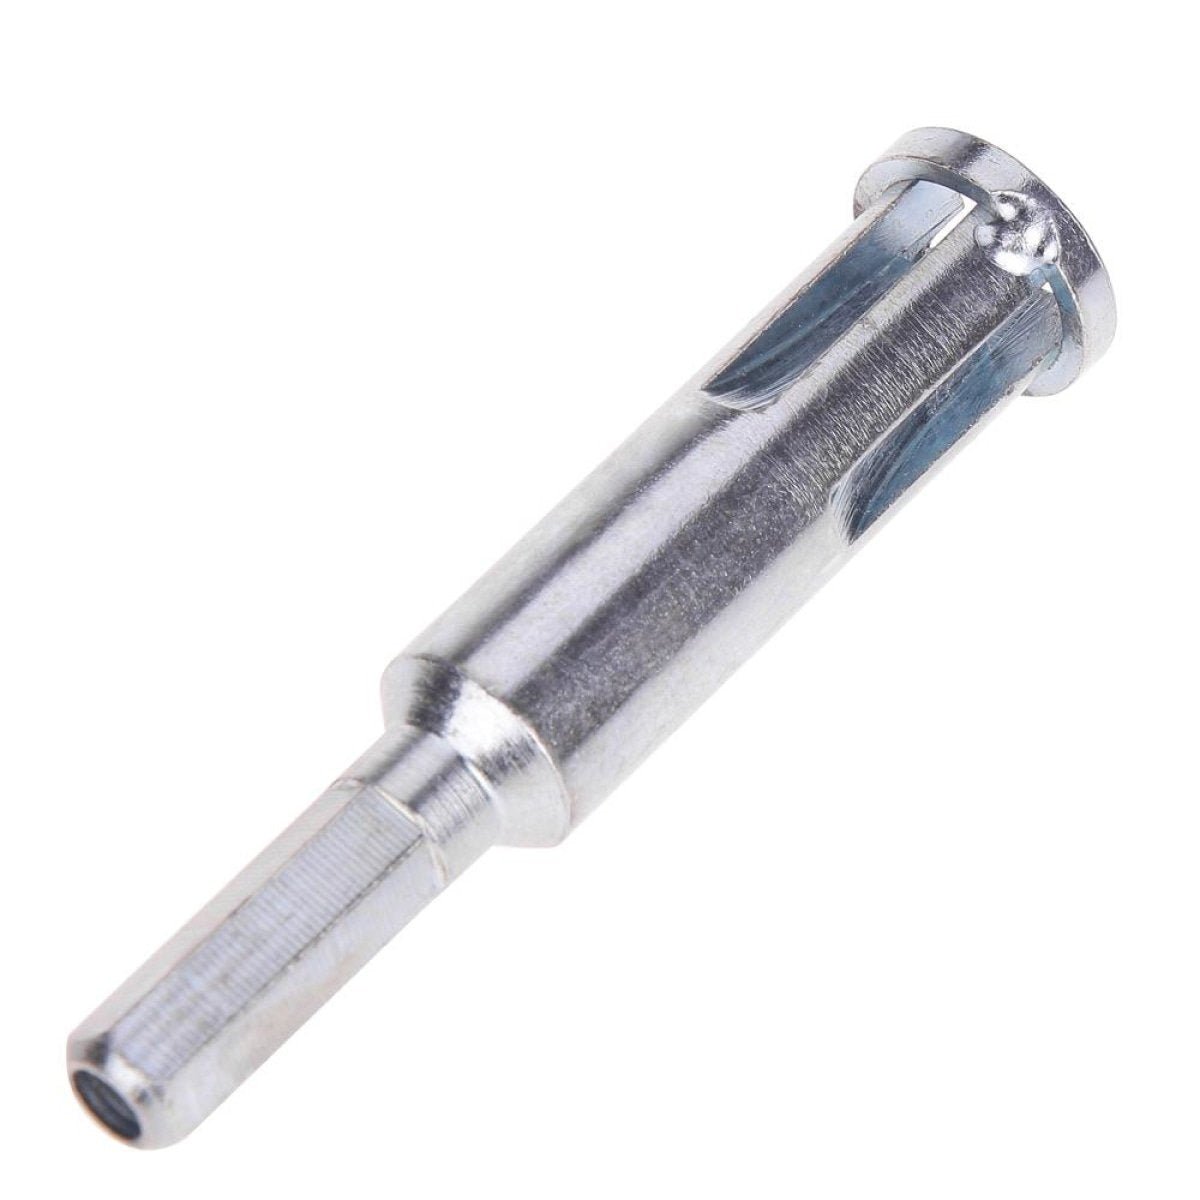 Electrical Cable Wire Twist Tool Hole Universal Automatic Connector - 2.5-4 Manganese Steel - Asia Sell